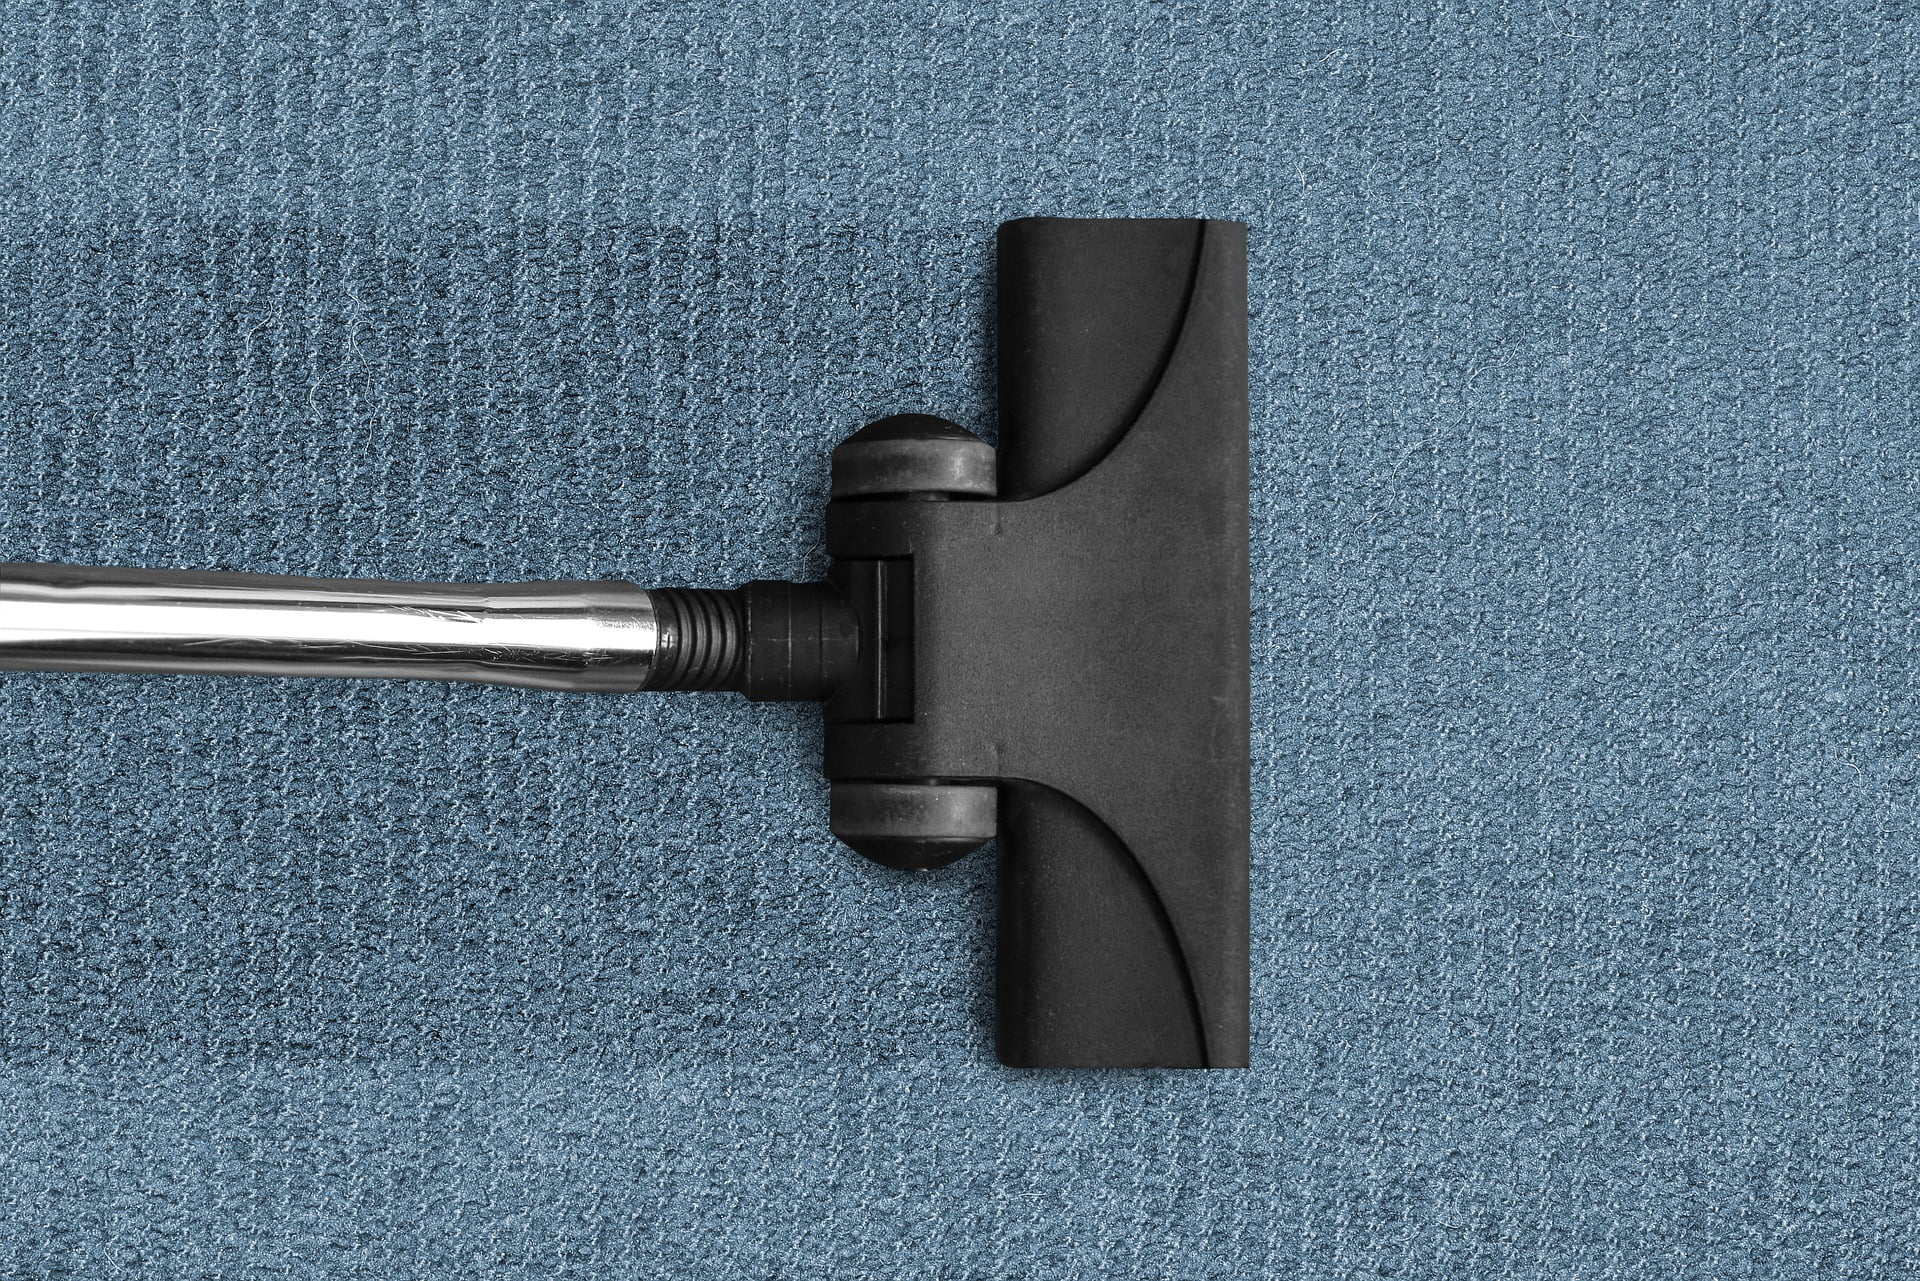 shop vacuum for carpet cleaning